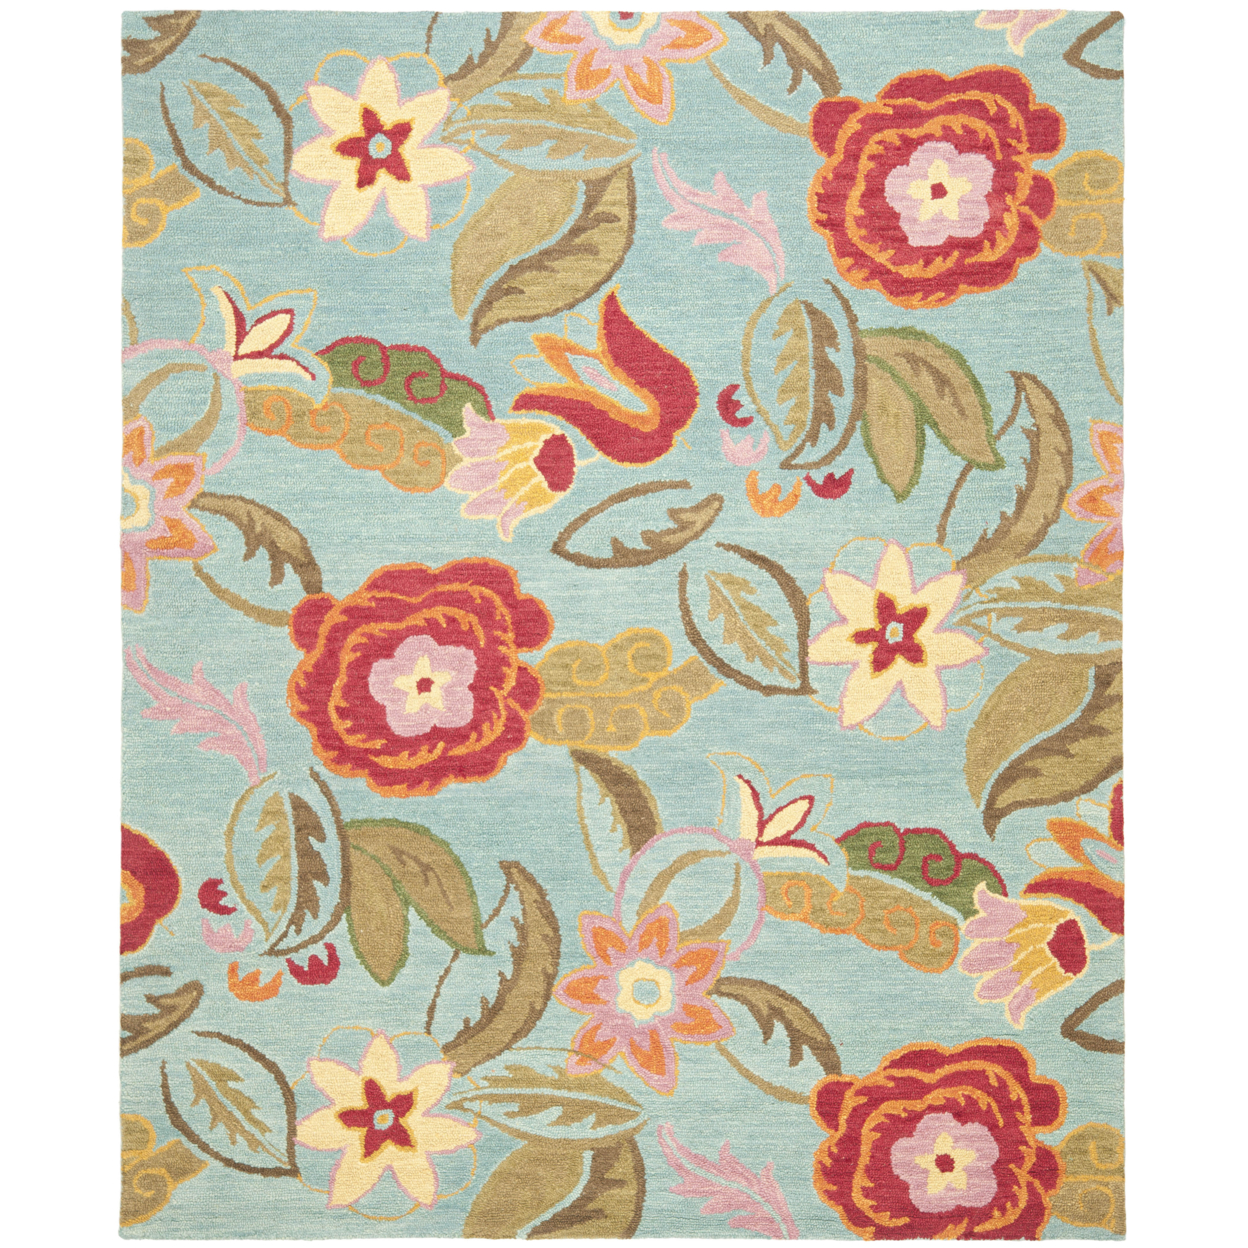 SAFAVIEH Blossom BLM675A Hand-hooked Blue / Multi Rug - 6' X 9'